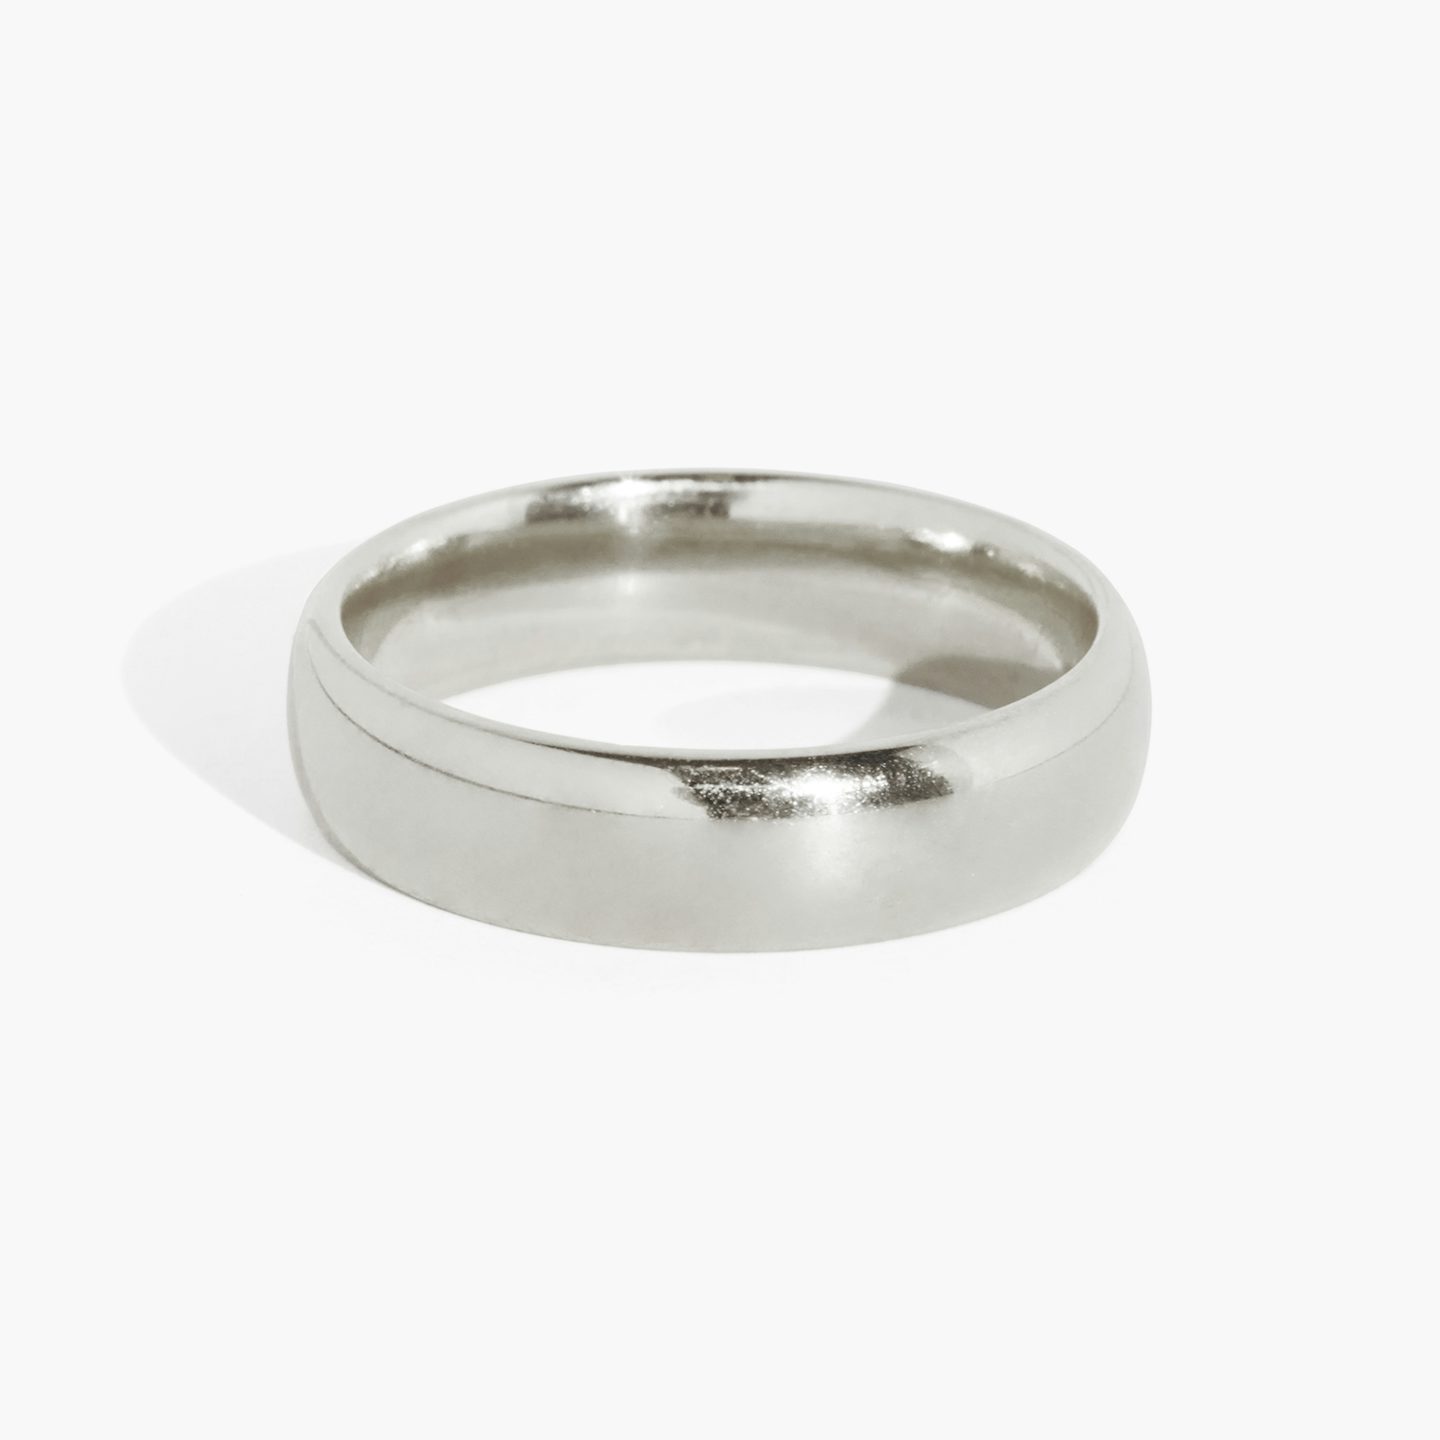 The Round | Platinum | Band width: Large - 4.5mm